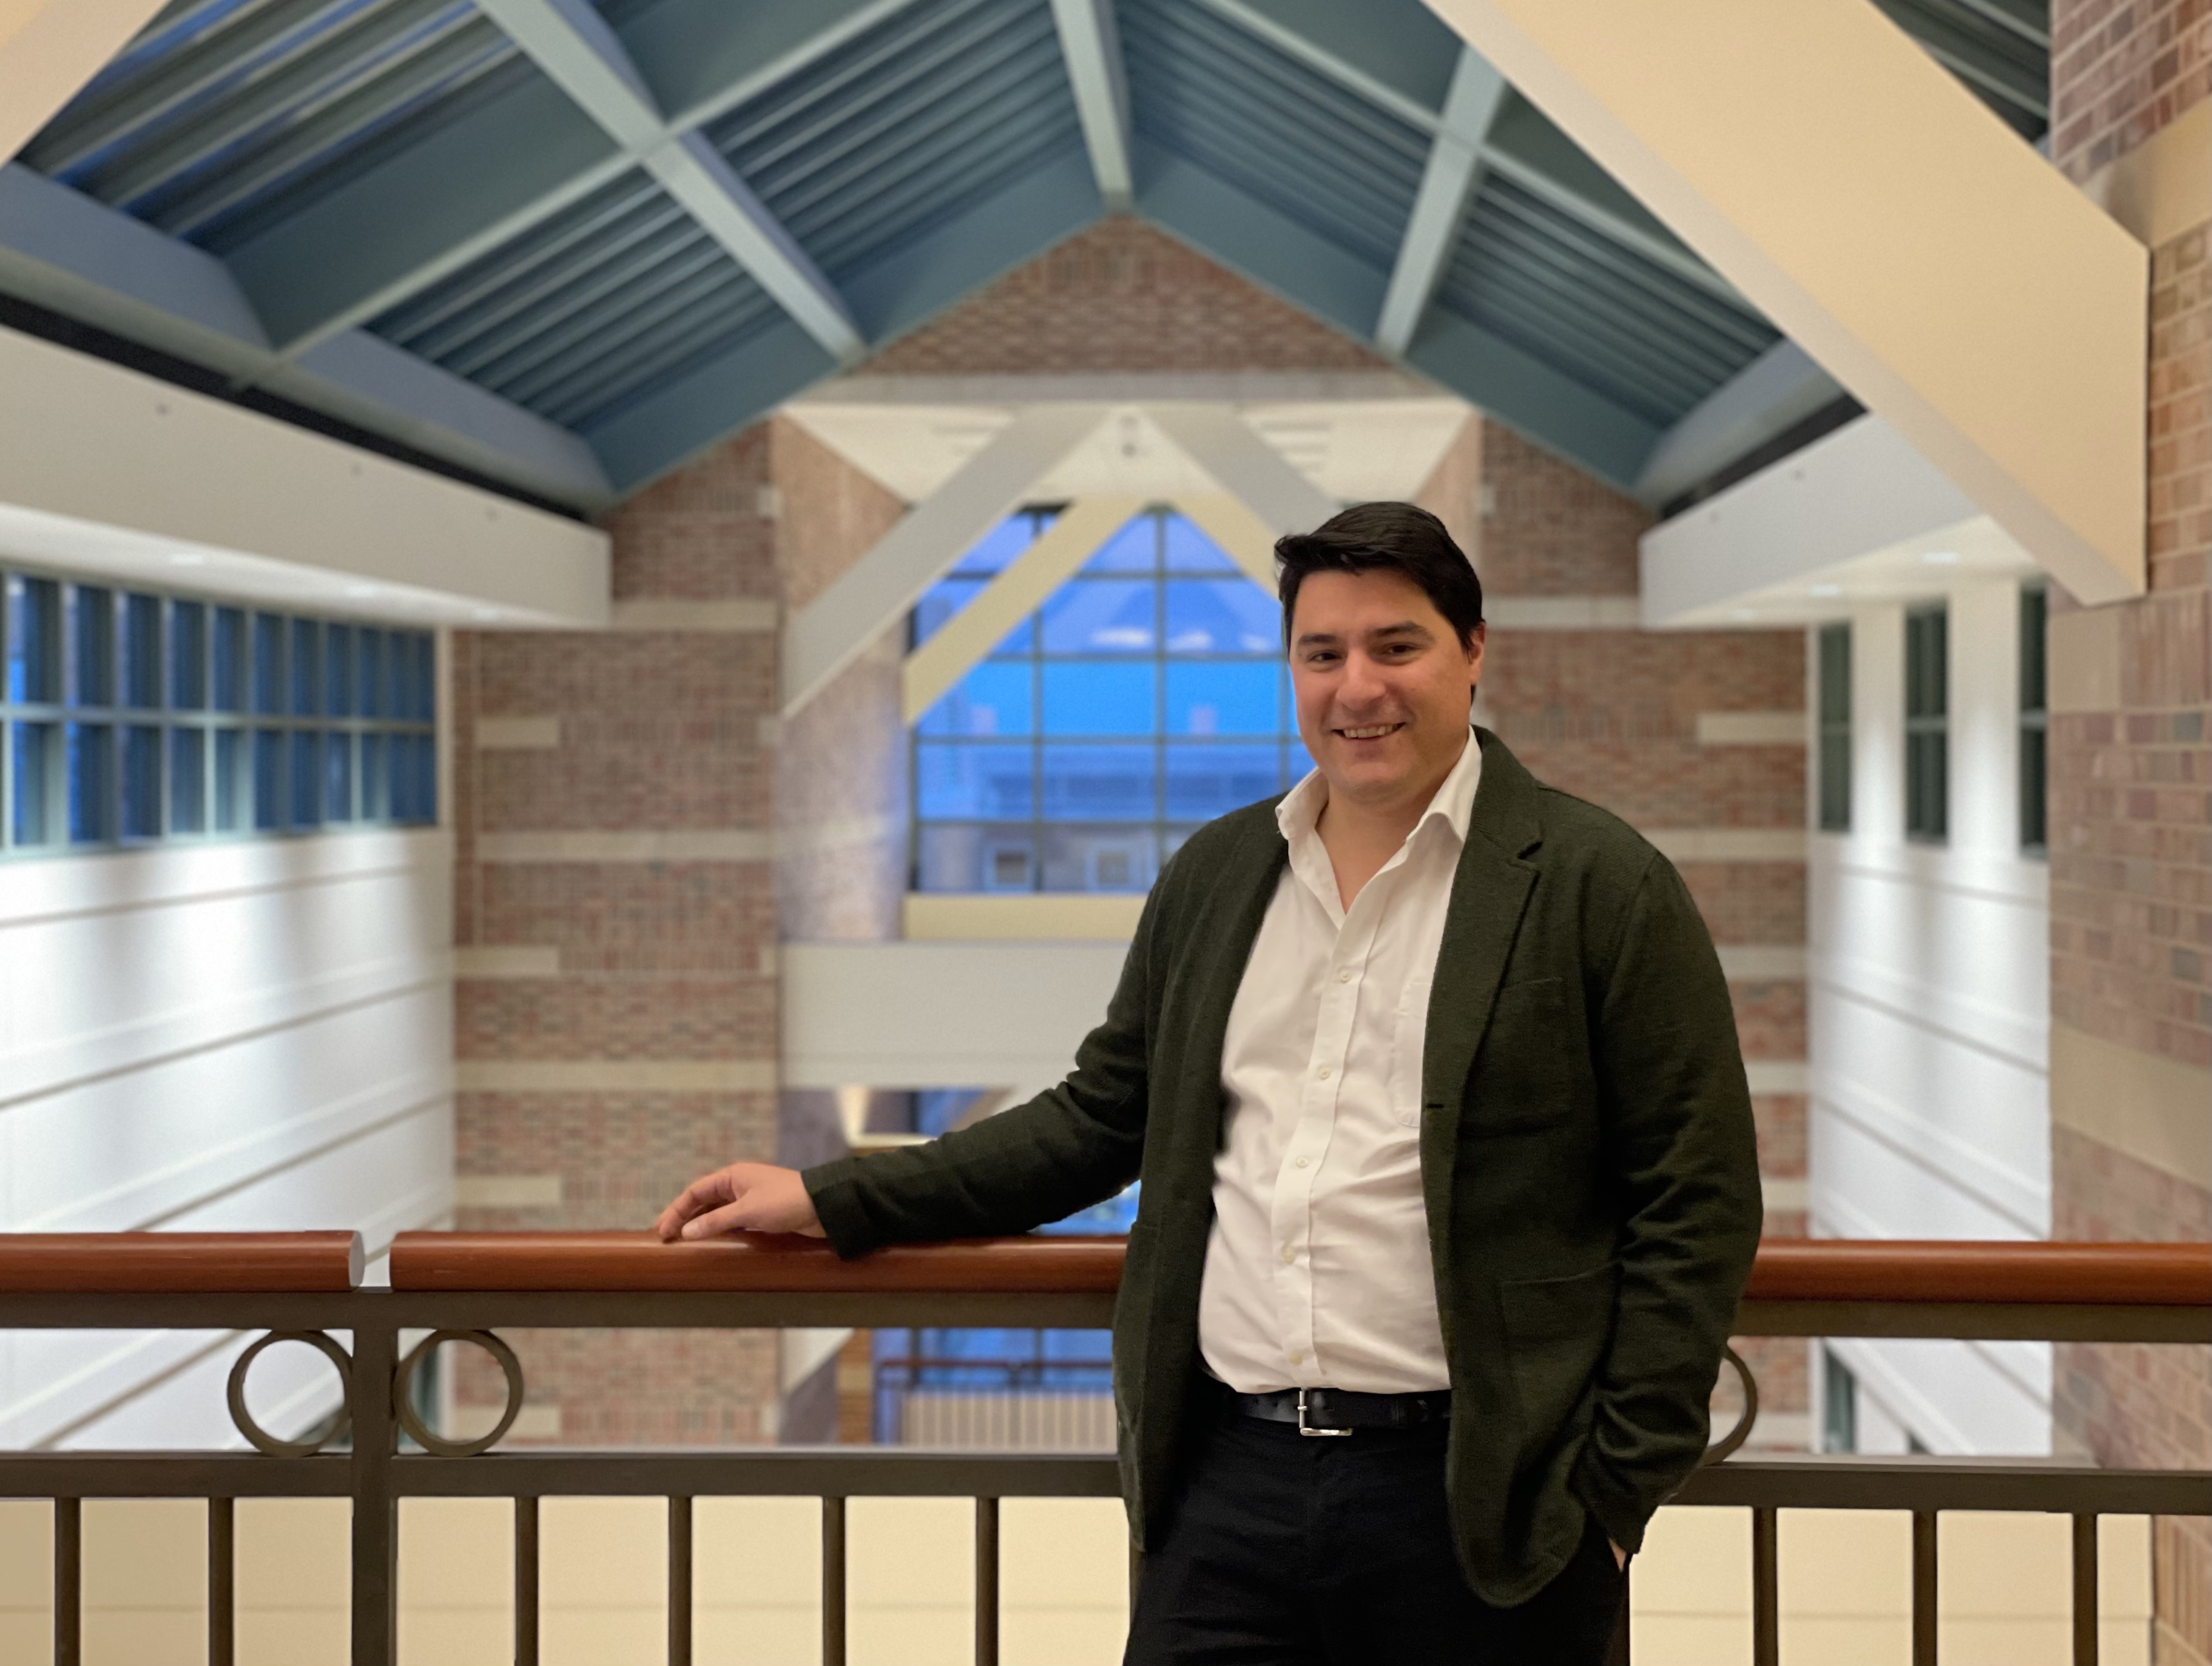 Postdoc Guillermo L. Monroy stands on a bridged walkway in the Beckman Institute, smiling with his right arm extended on the railing.